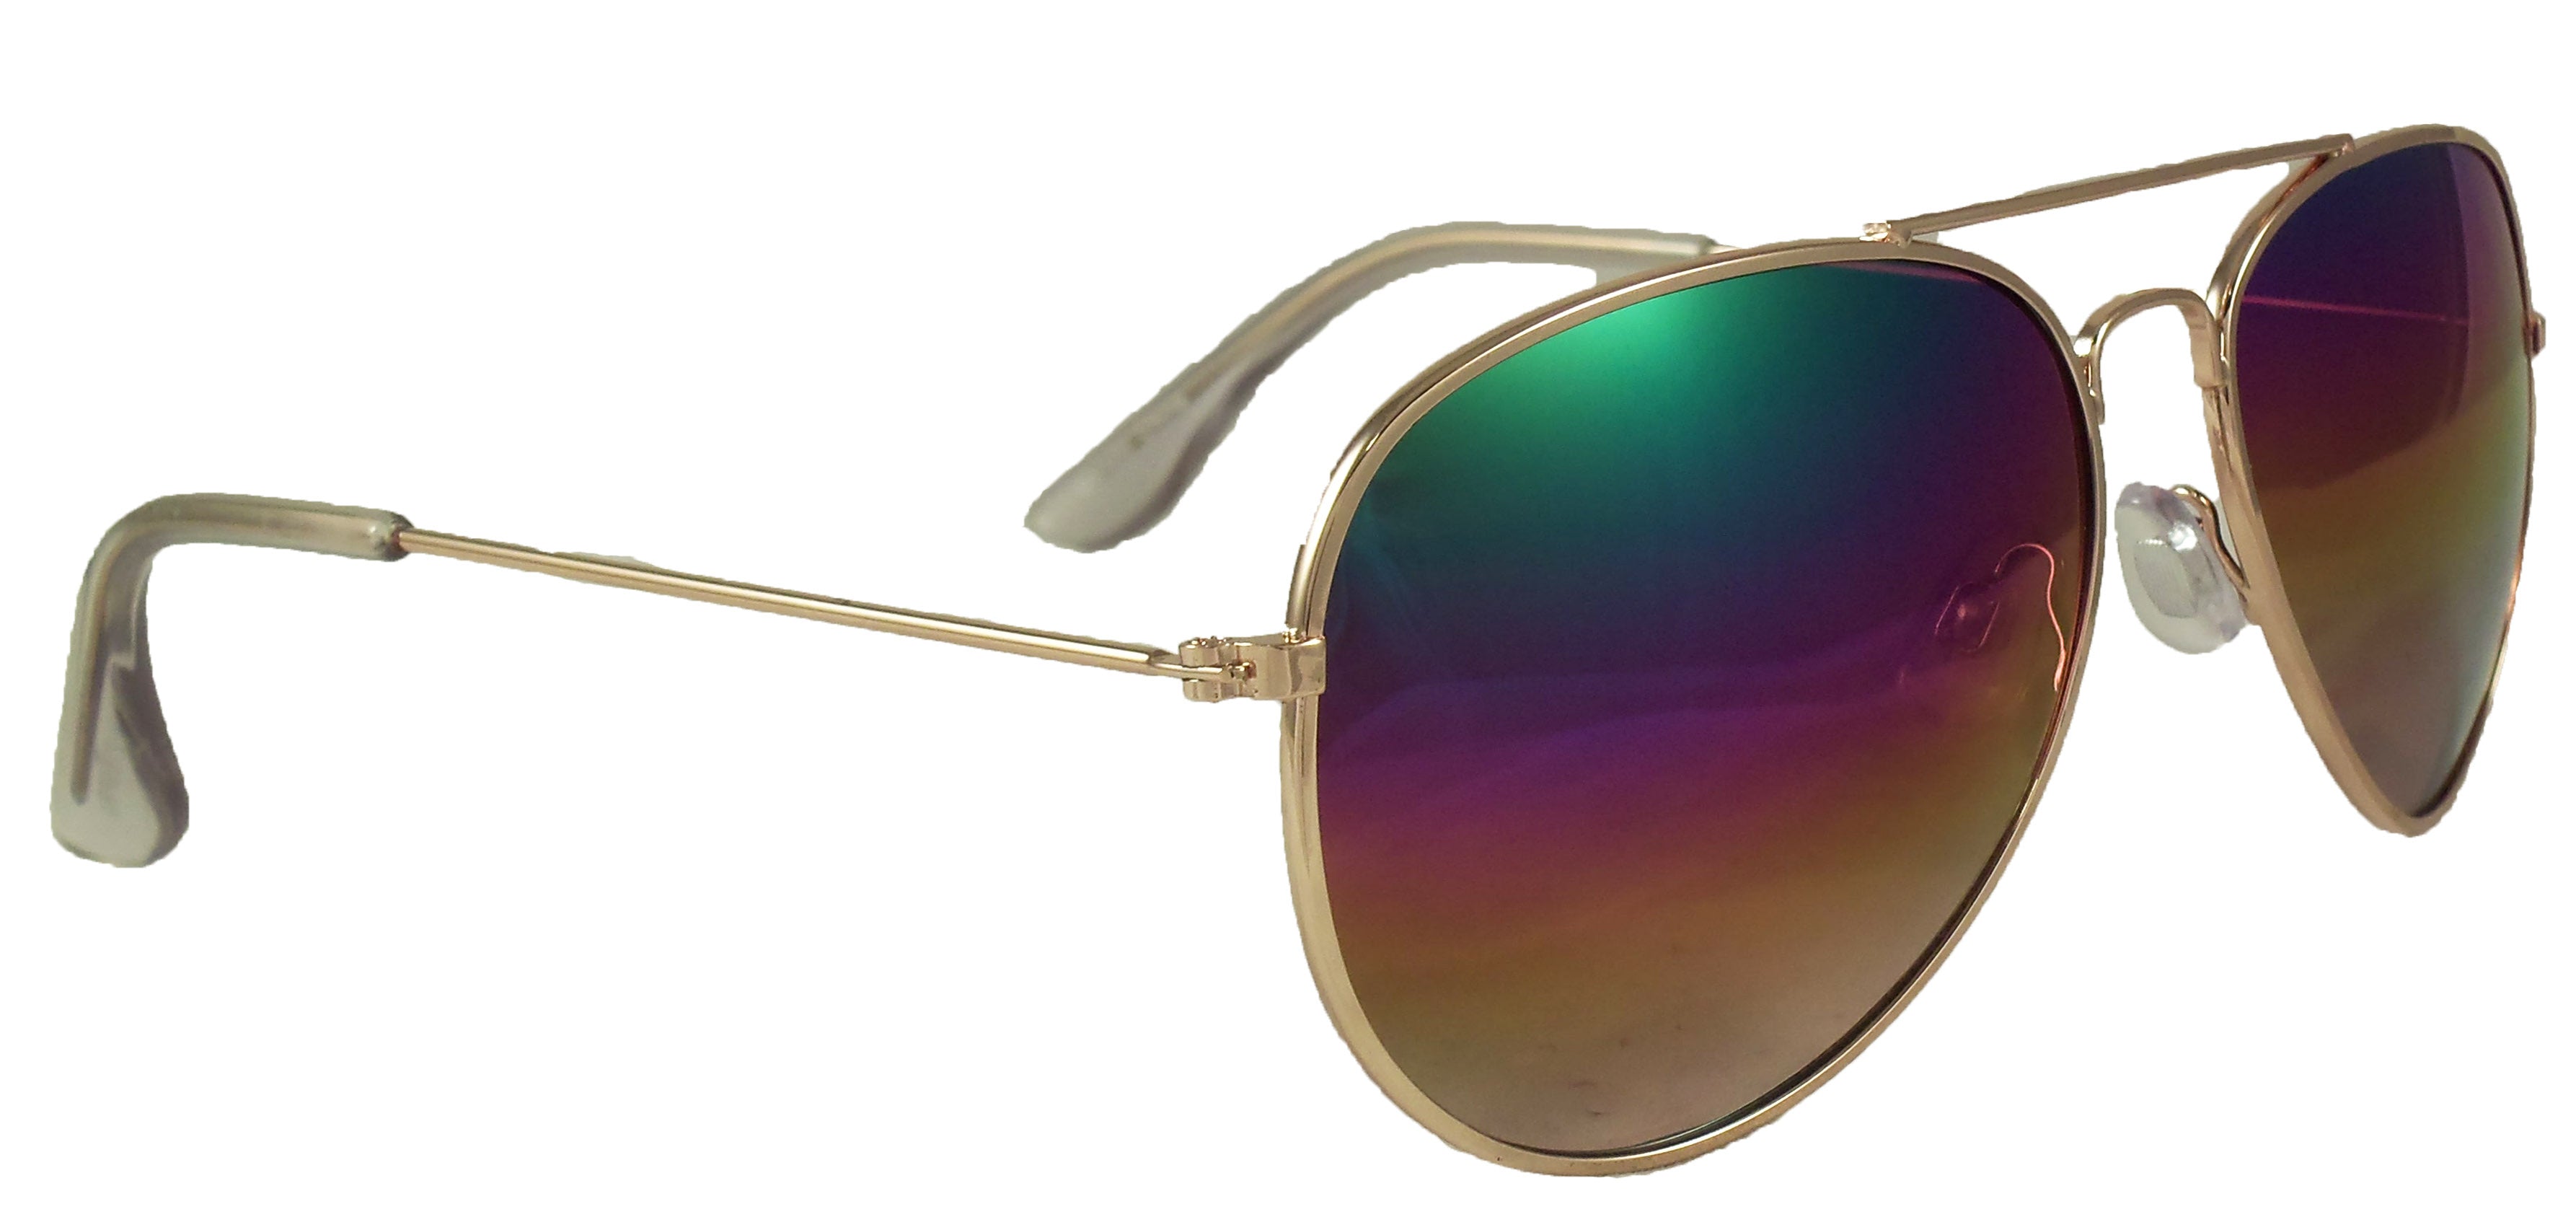 Buy Gravity Shades Rainbow Color Horn-Rim Sunglass at Amazon.in